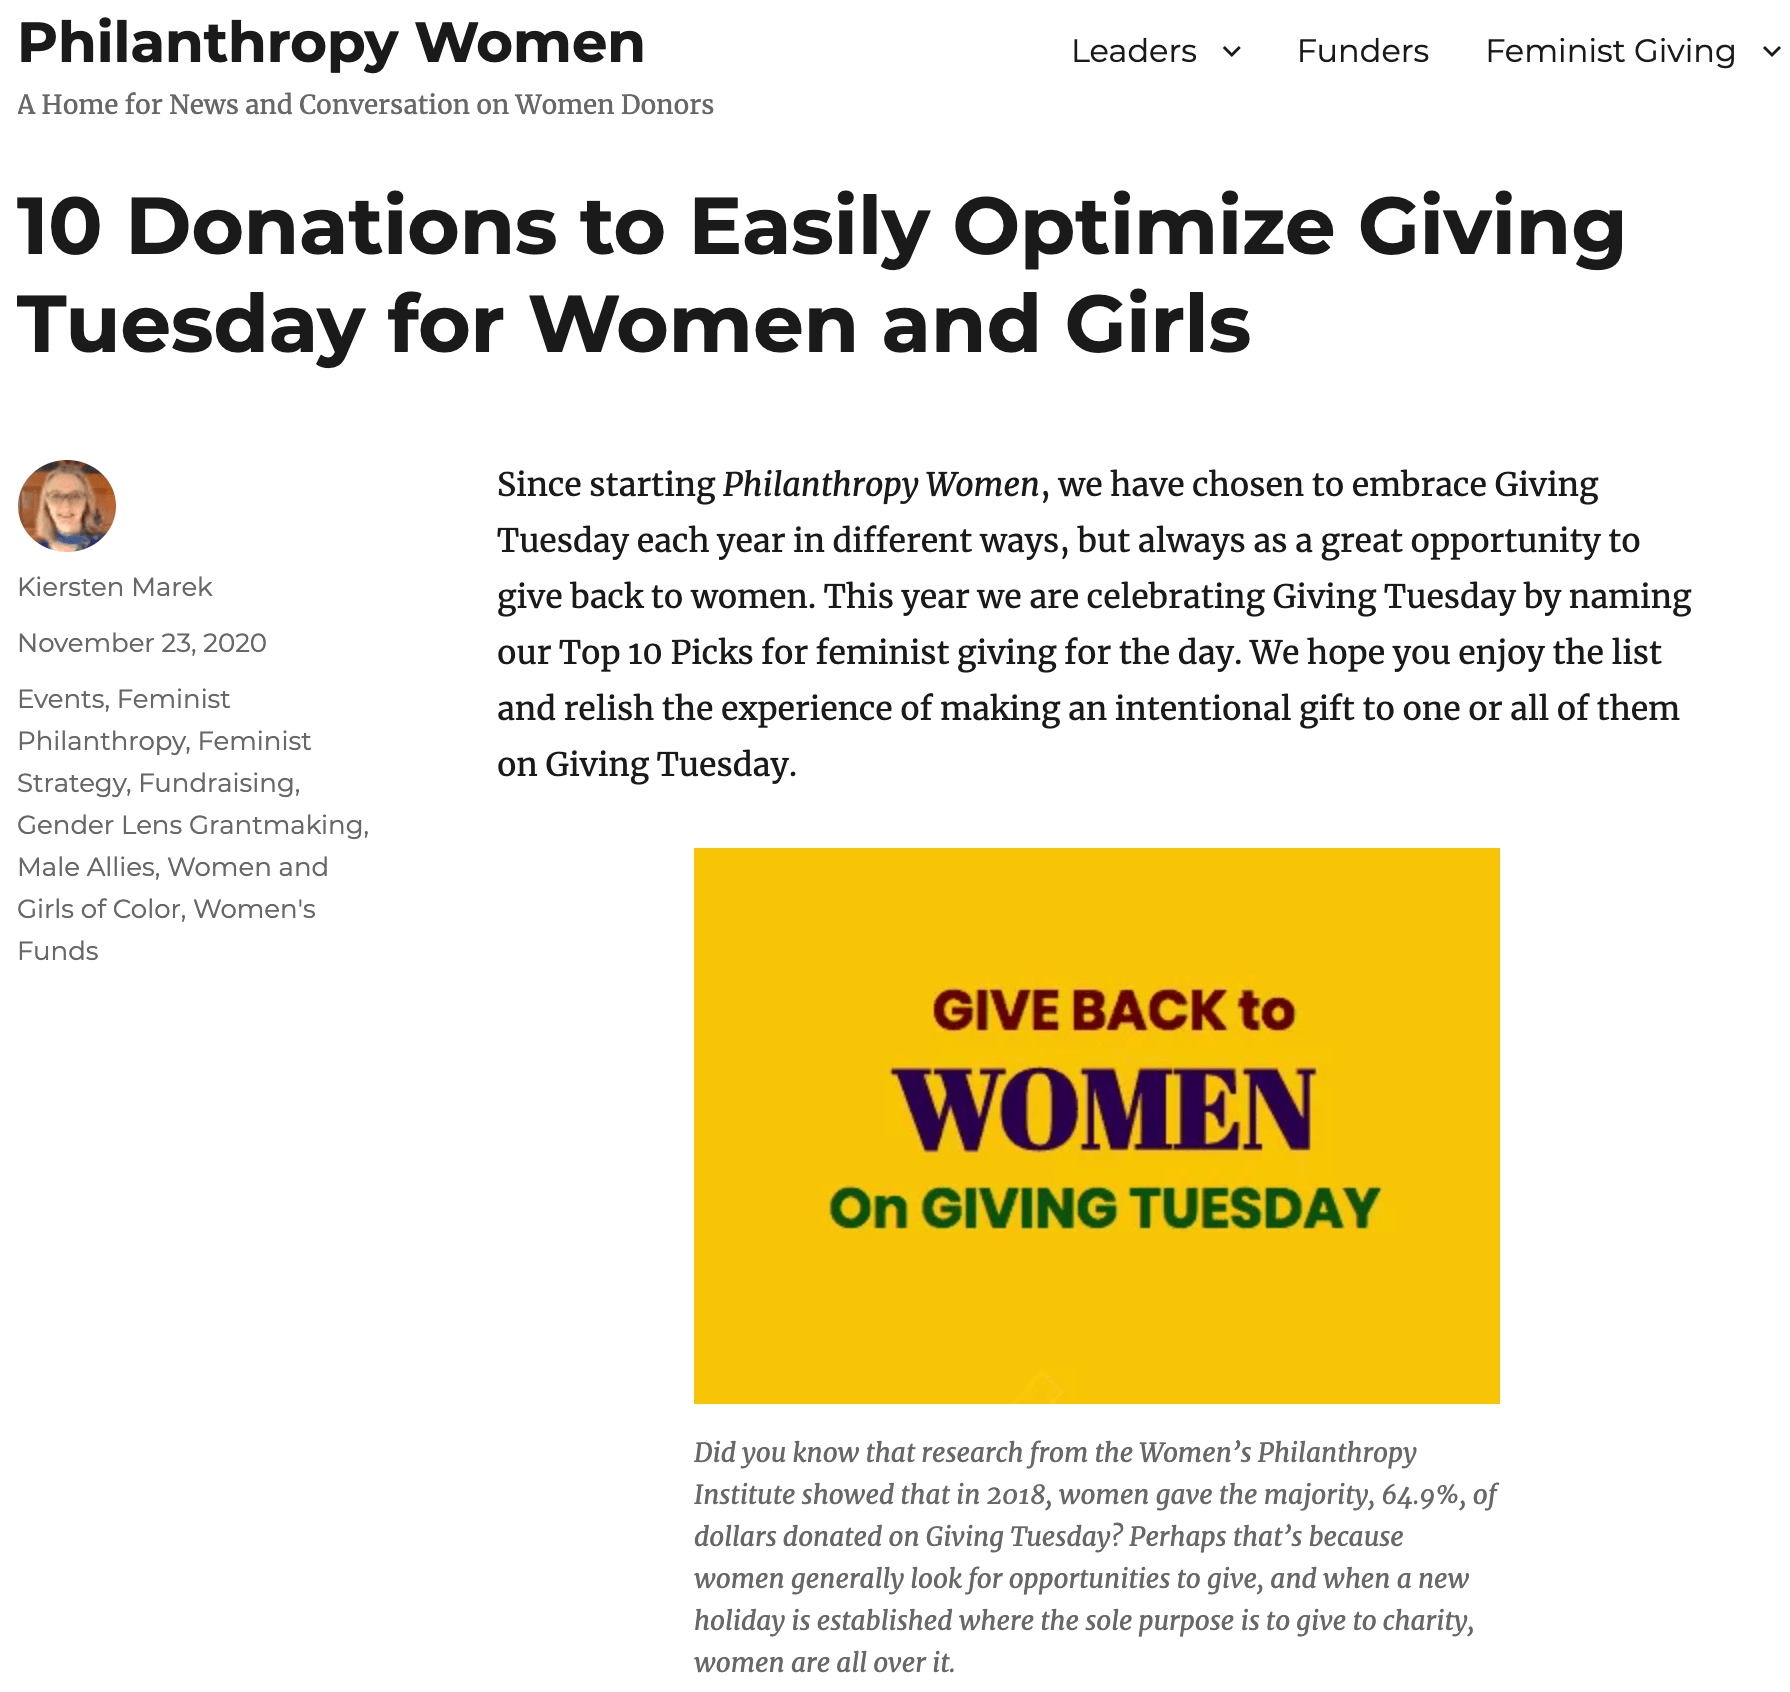 10 Donations to Easily Optimize Giving Tuesday for Women and Girls